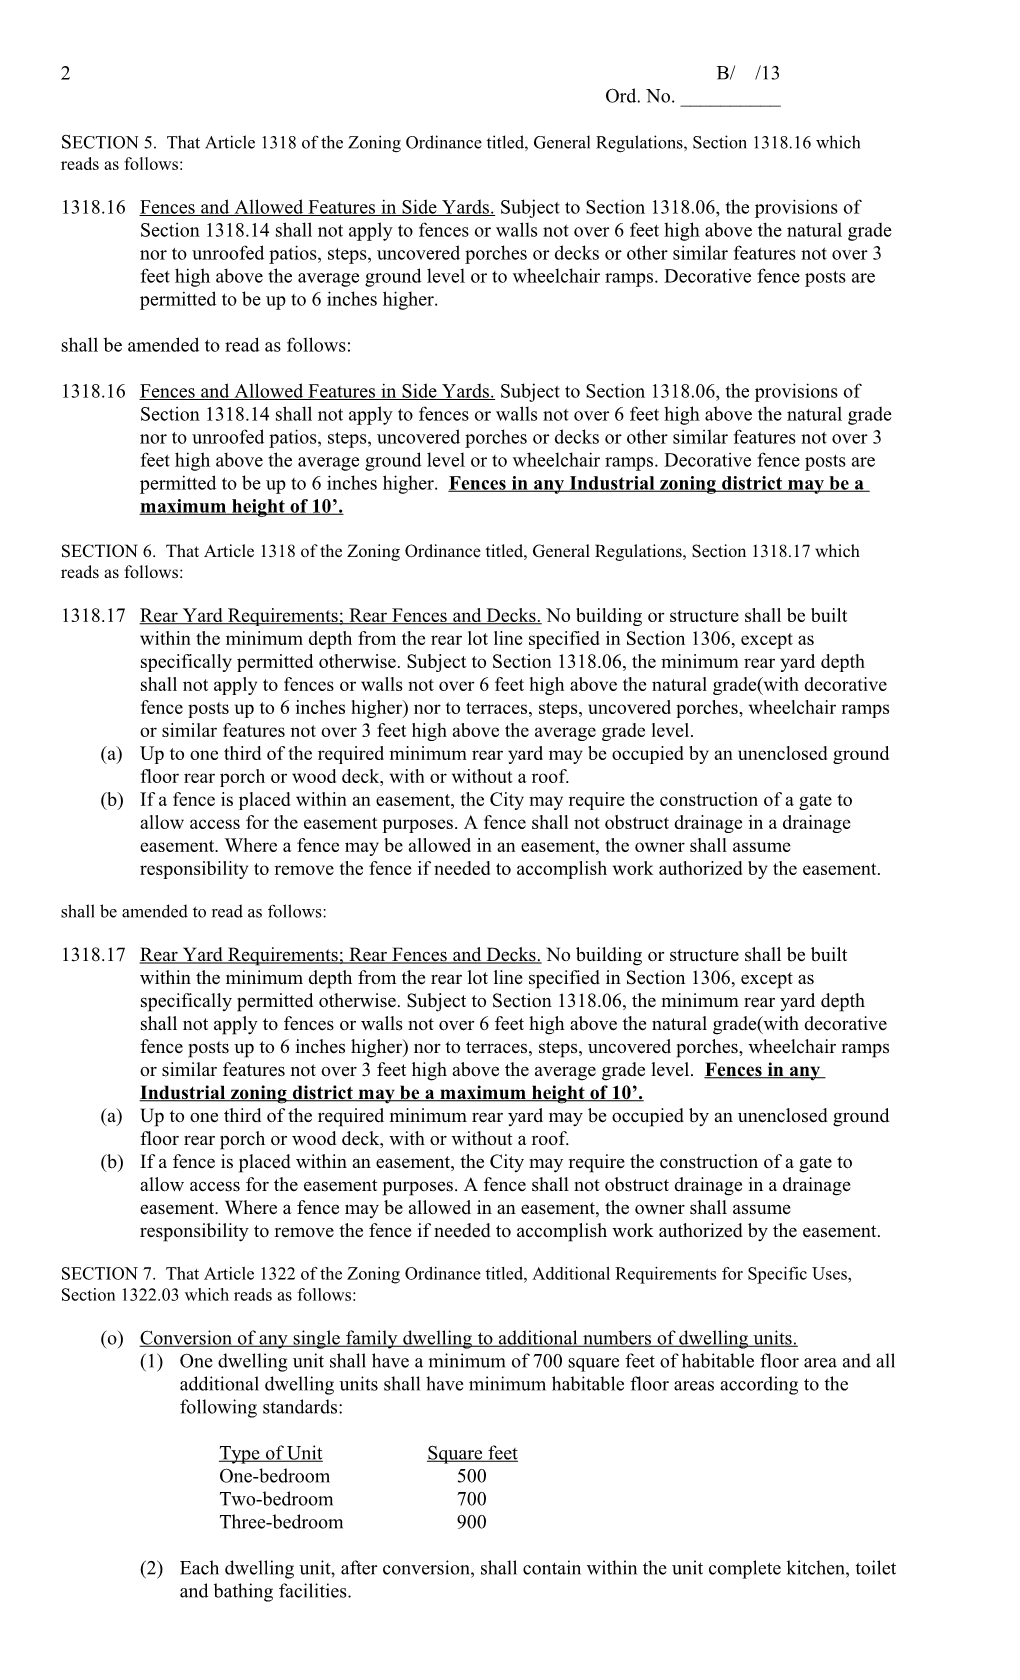 Draft for Public Hearing #2 August 20, 2013